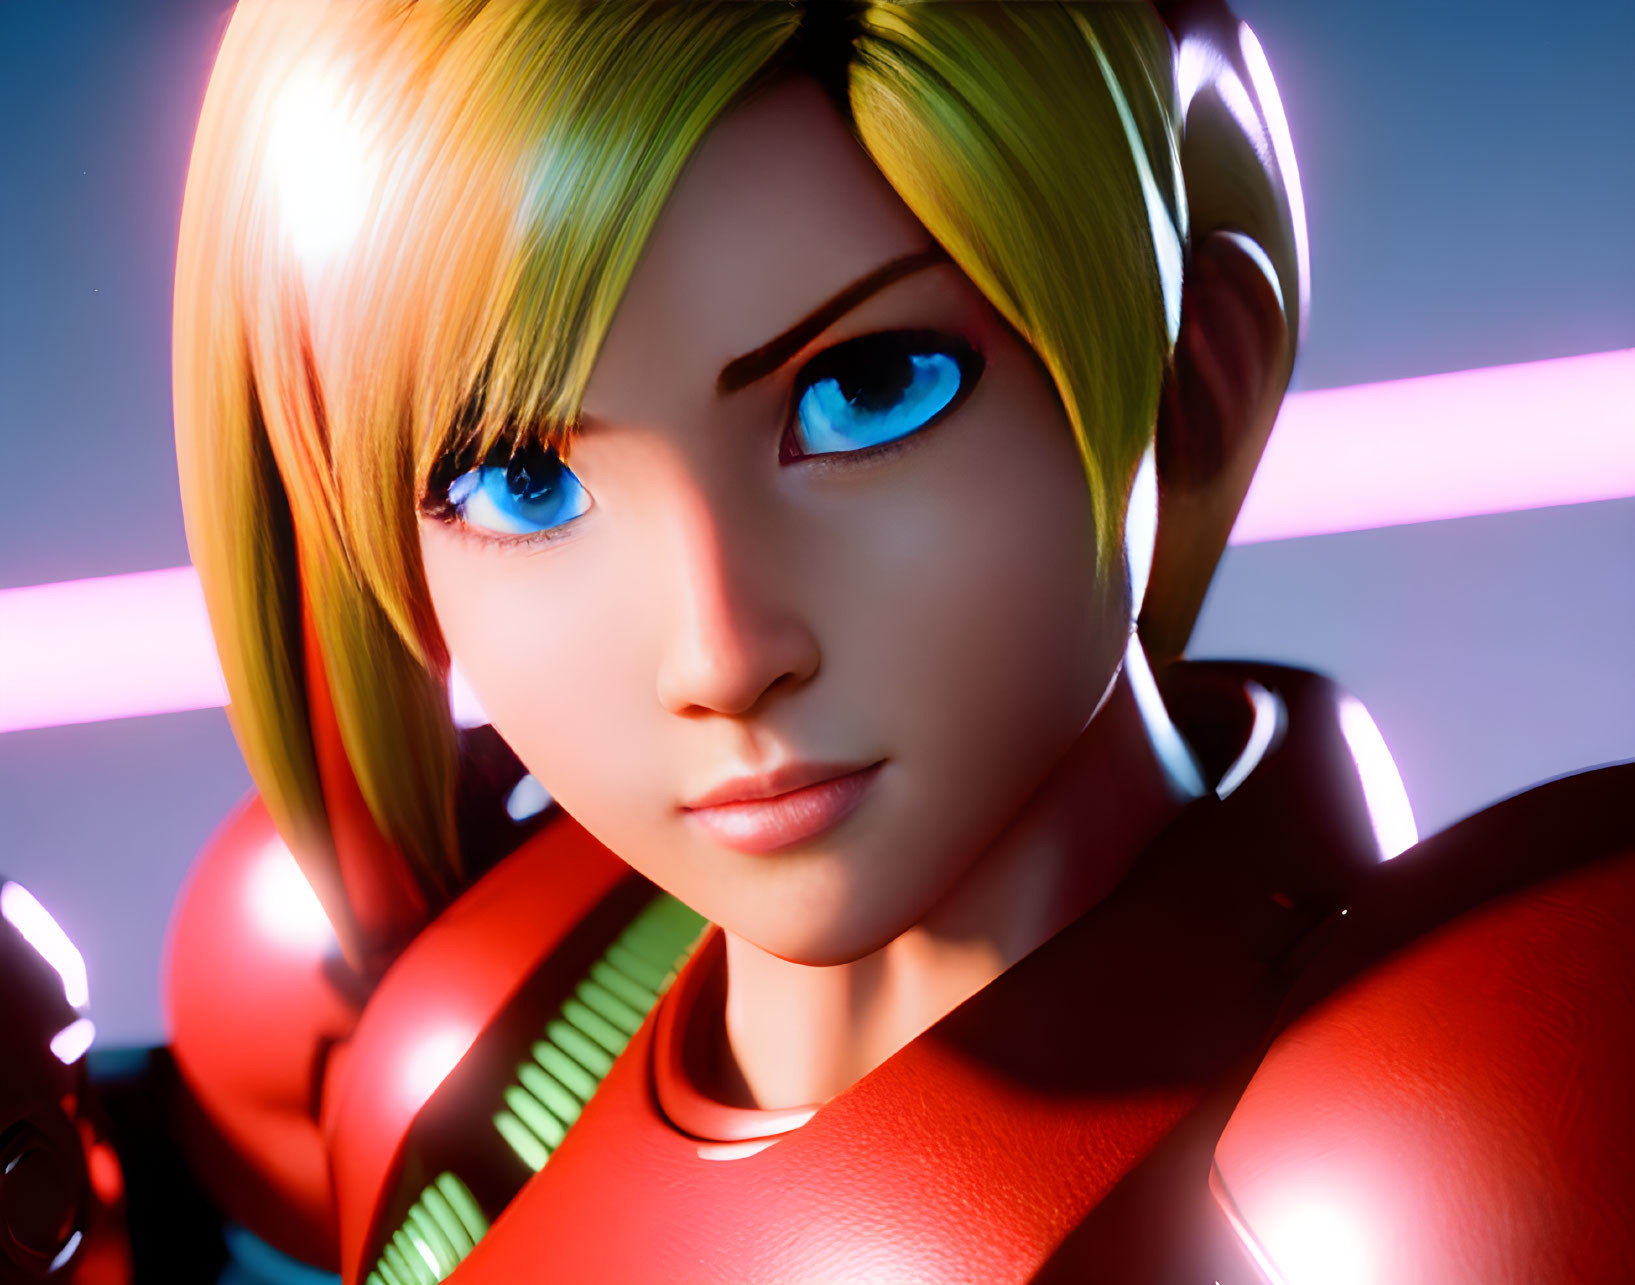 3D Rendered Image: Female Character with Blue Eyes, Blonde Hair, Red Suit & Green Acc